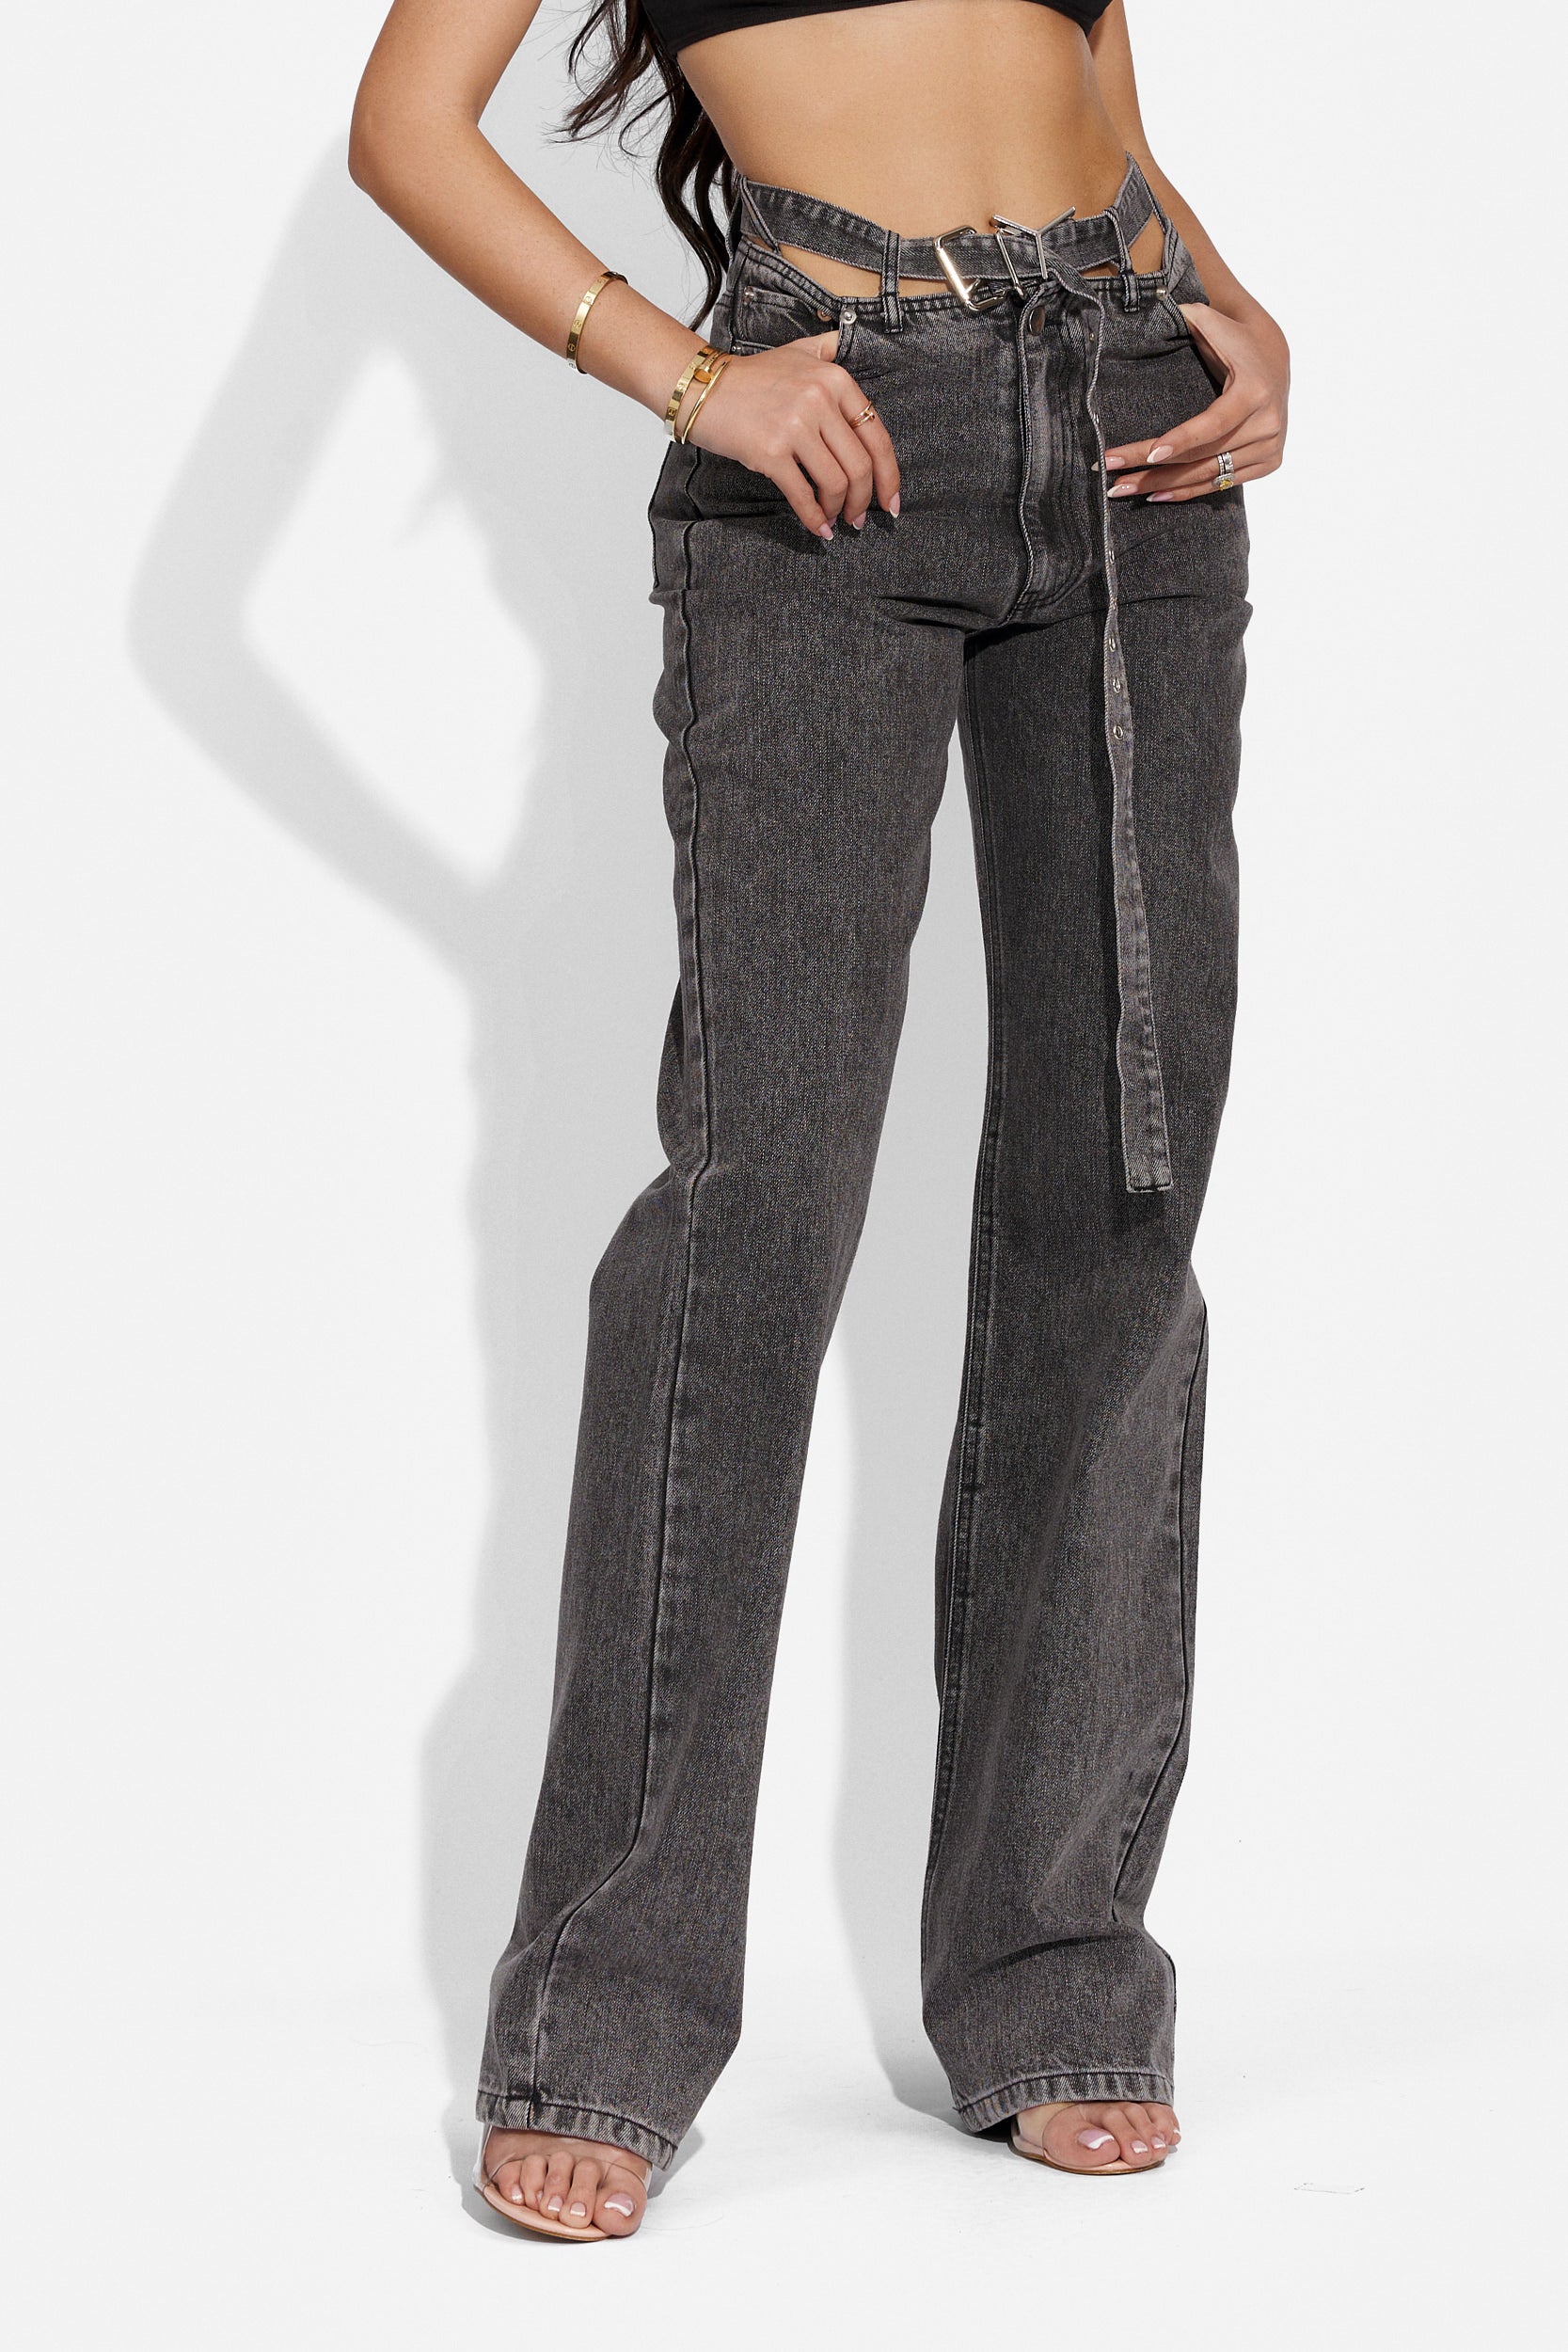 Getia Bogas grey casual jeans for women